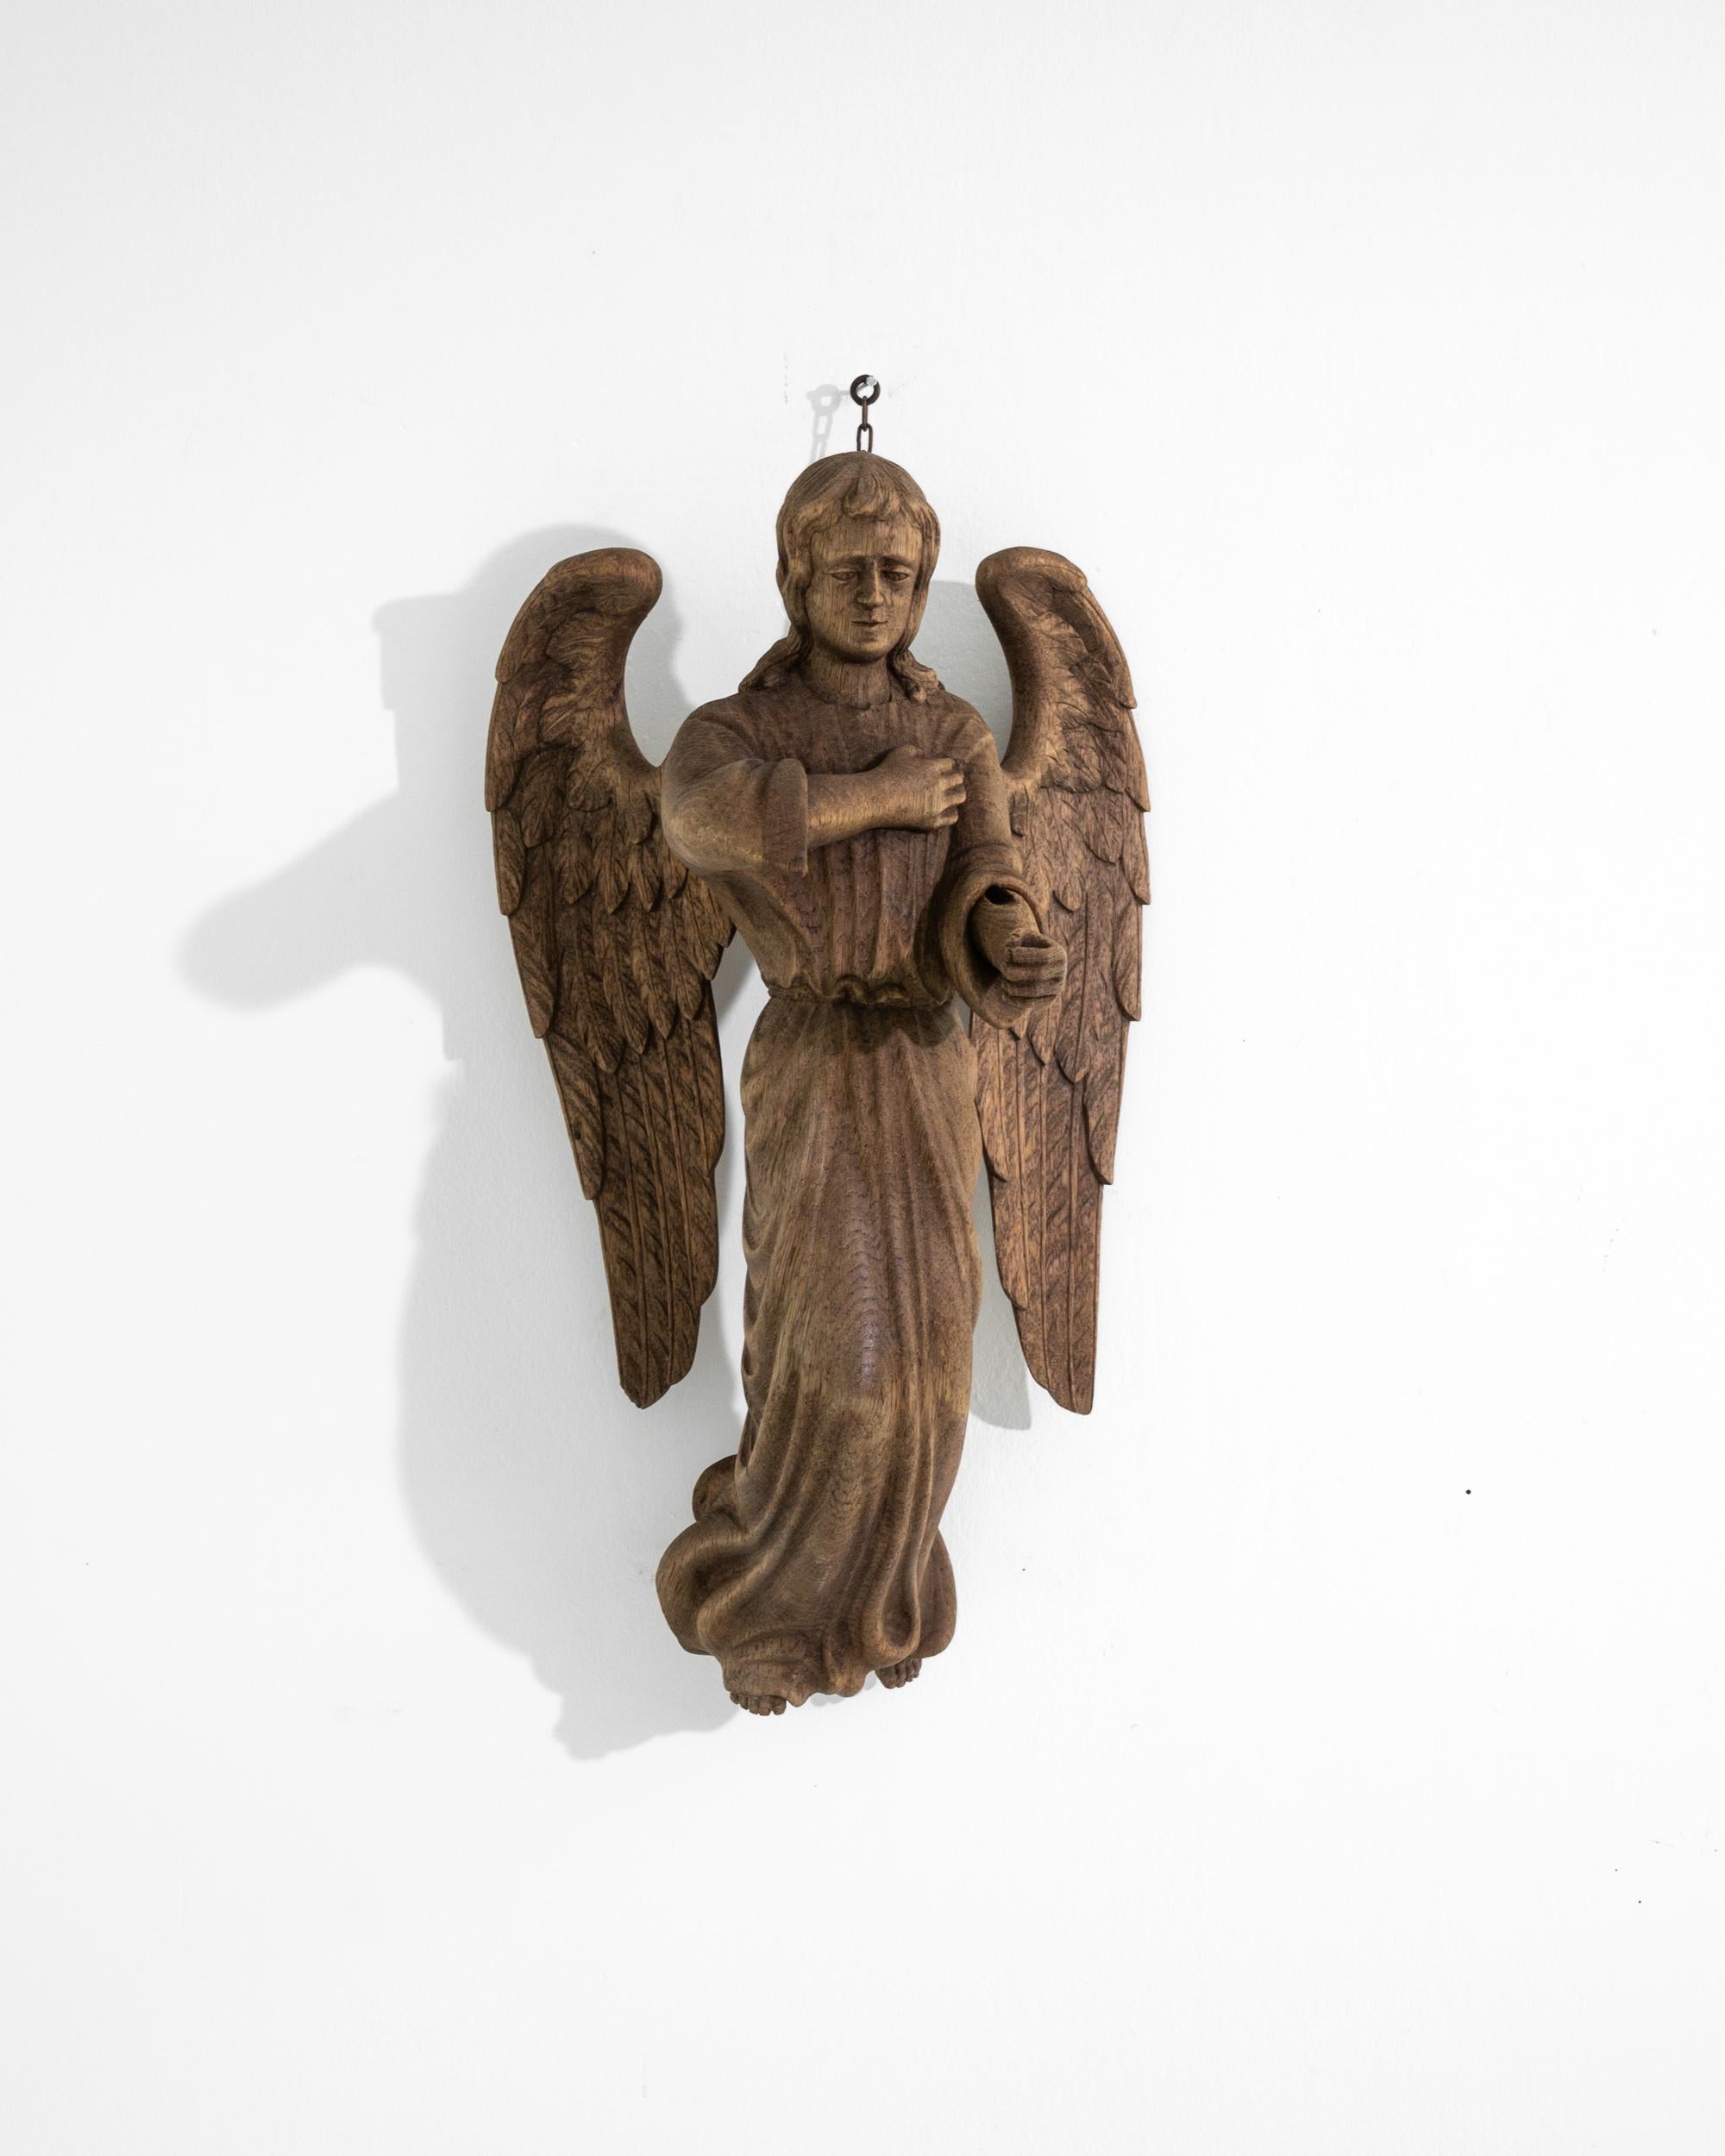 This statue of an angel was sculpted from a solid oak mass in France in the 19th century. The hand-carved craftsmanship is displayed through the faultless representation of folds, rippling on his monk's habit as if the creature was floating in the